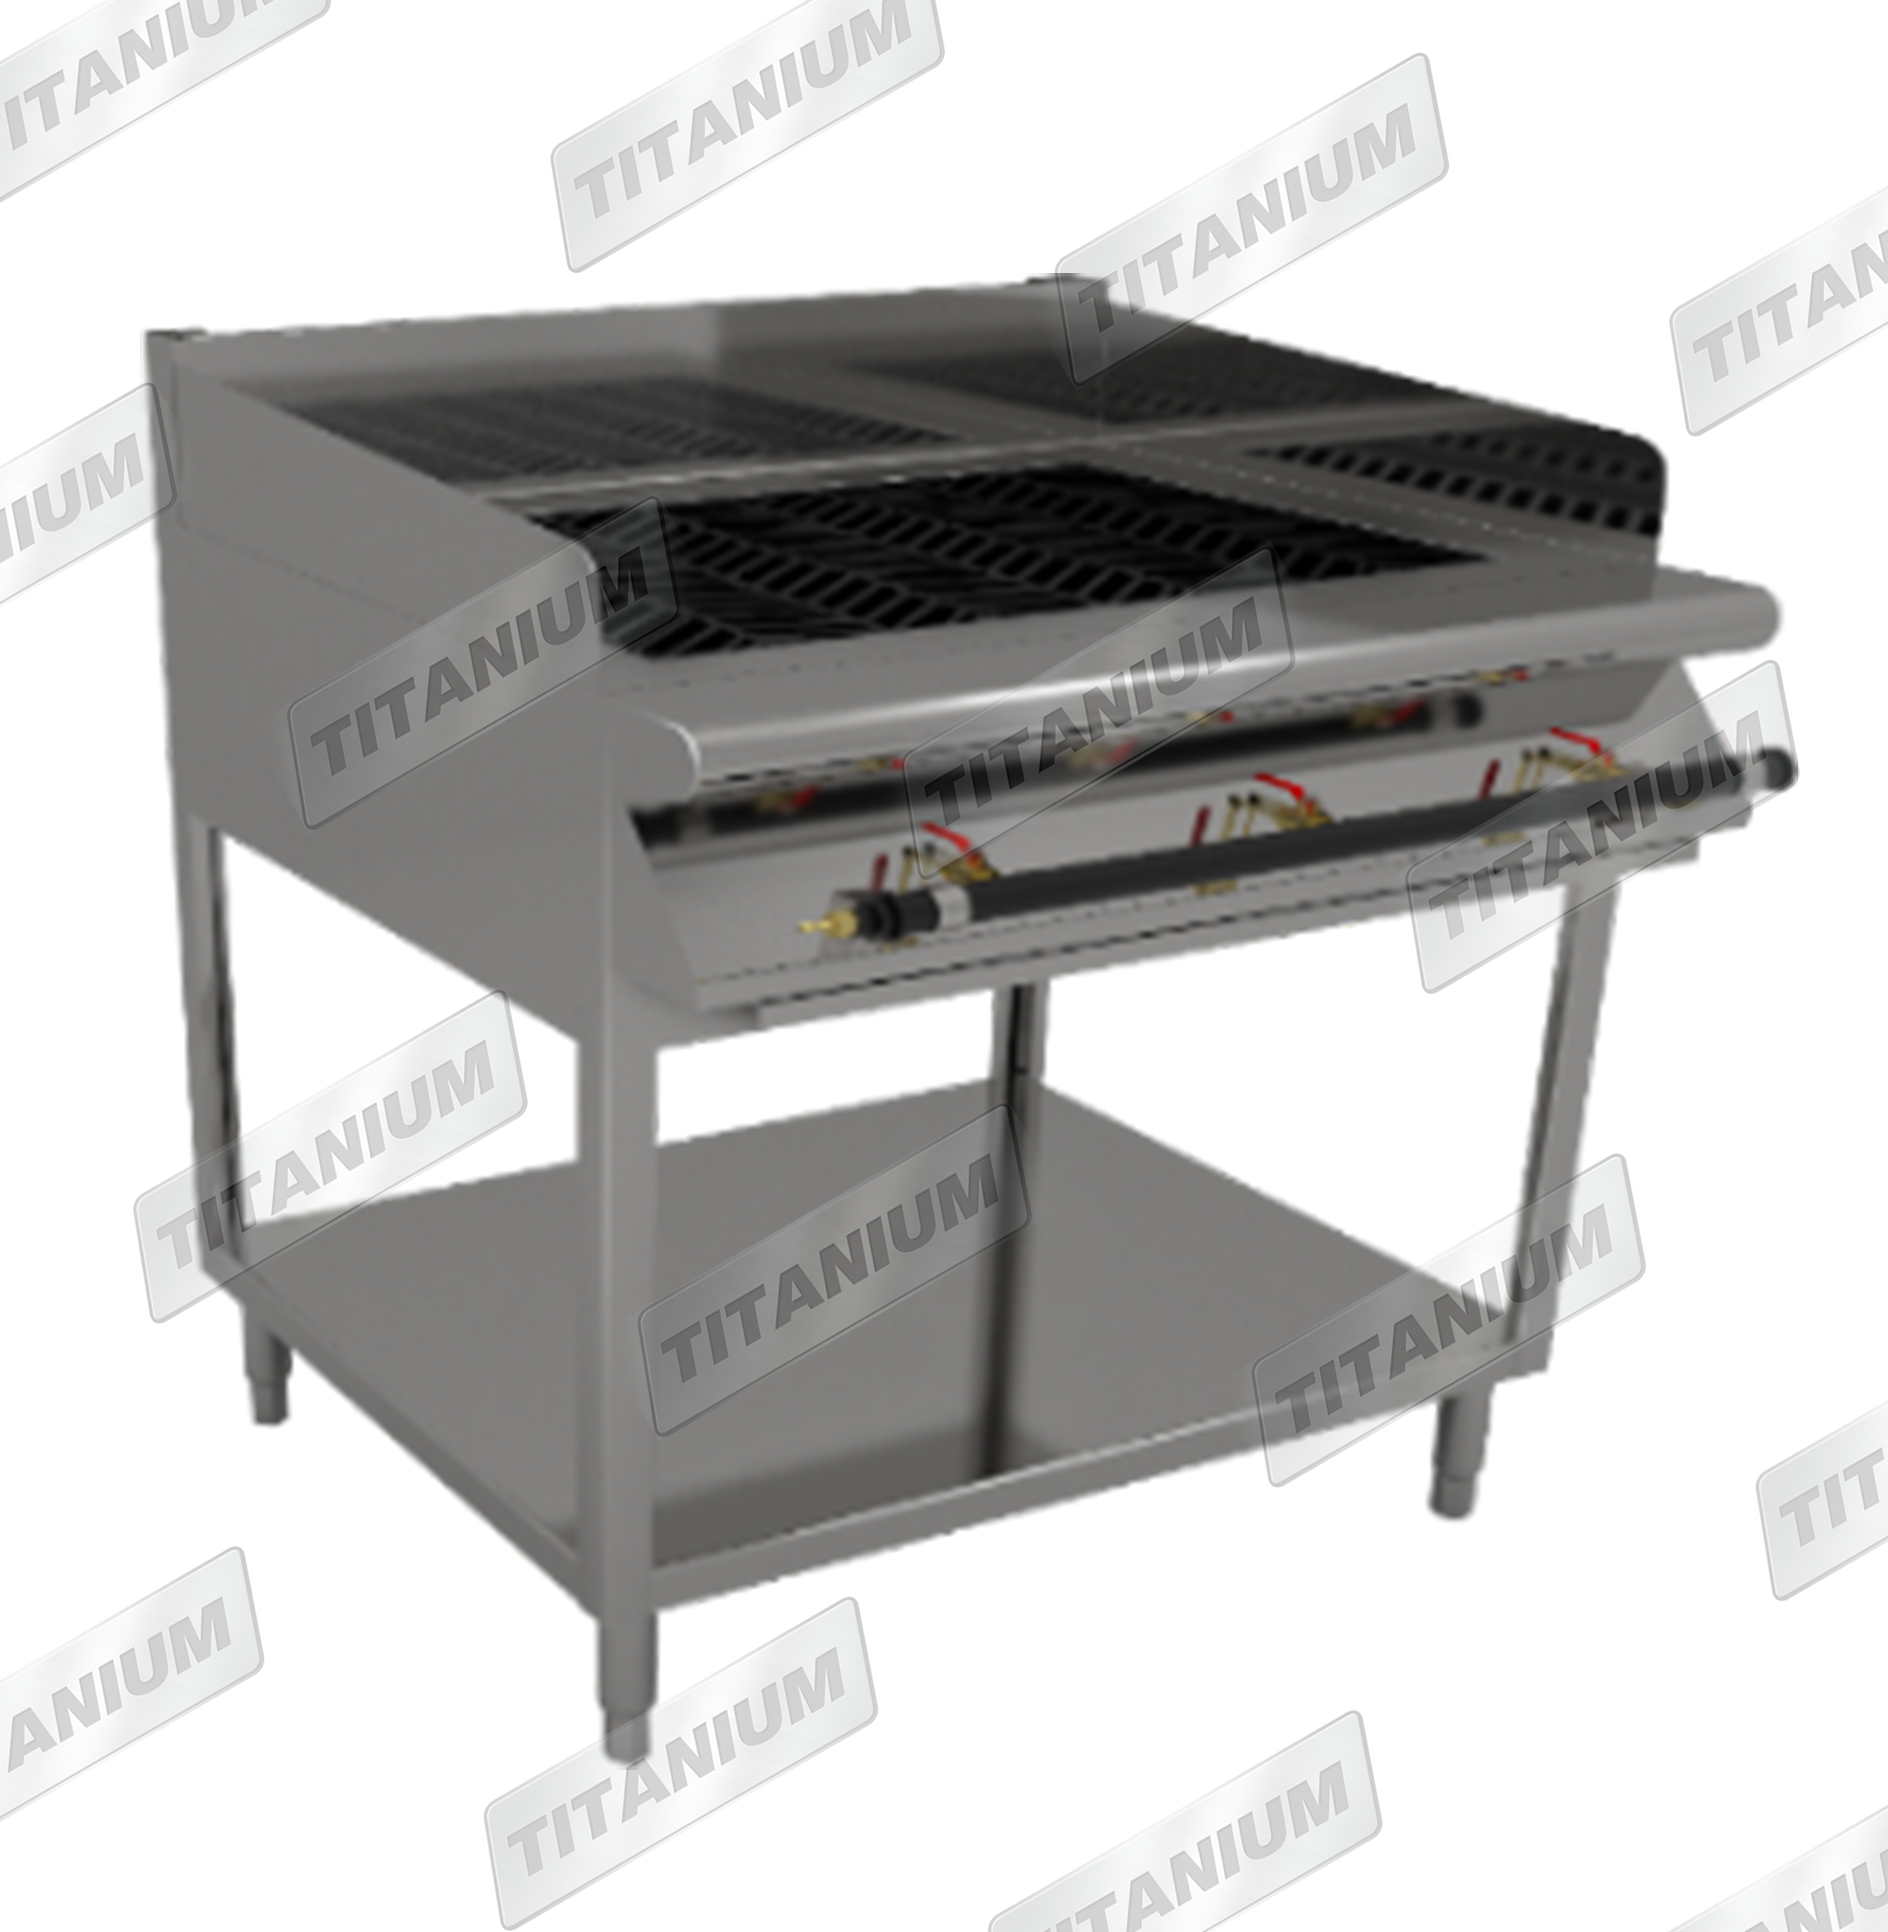 CHARCOAL BROILER WITH STAND